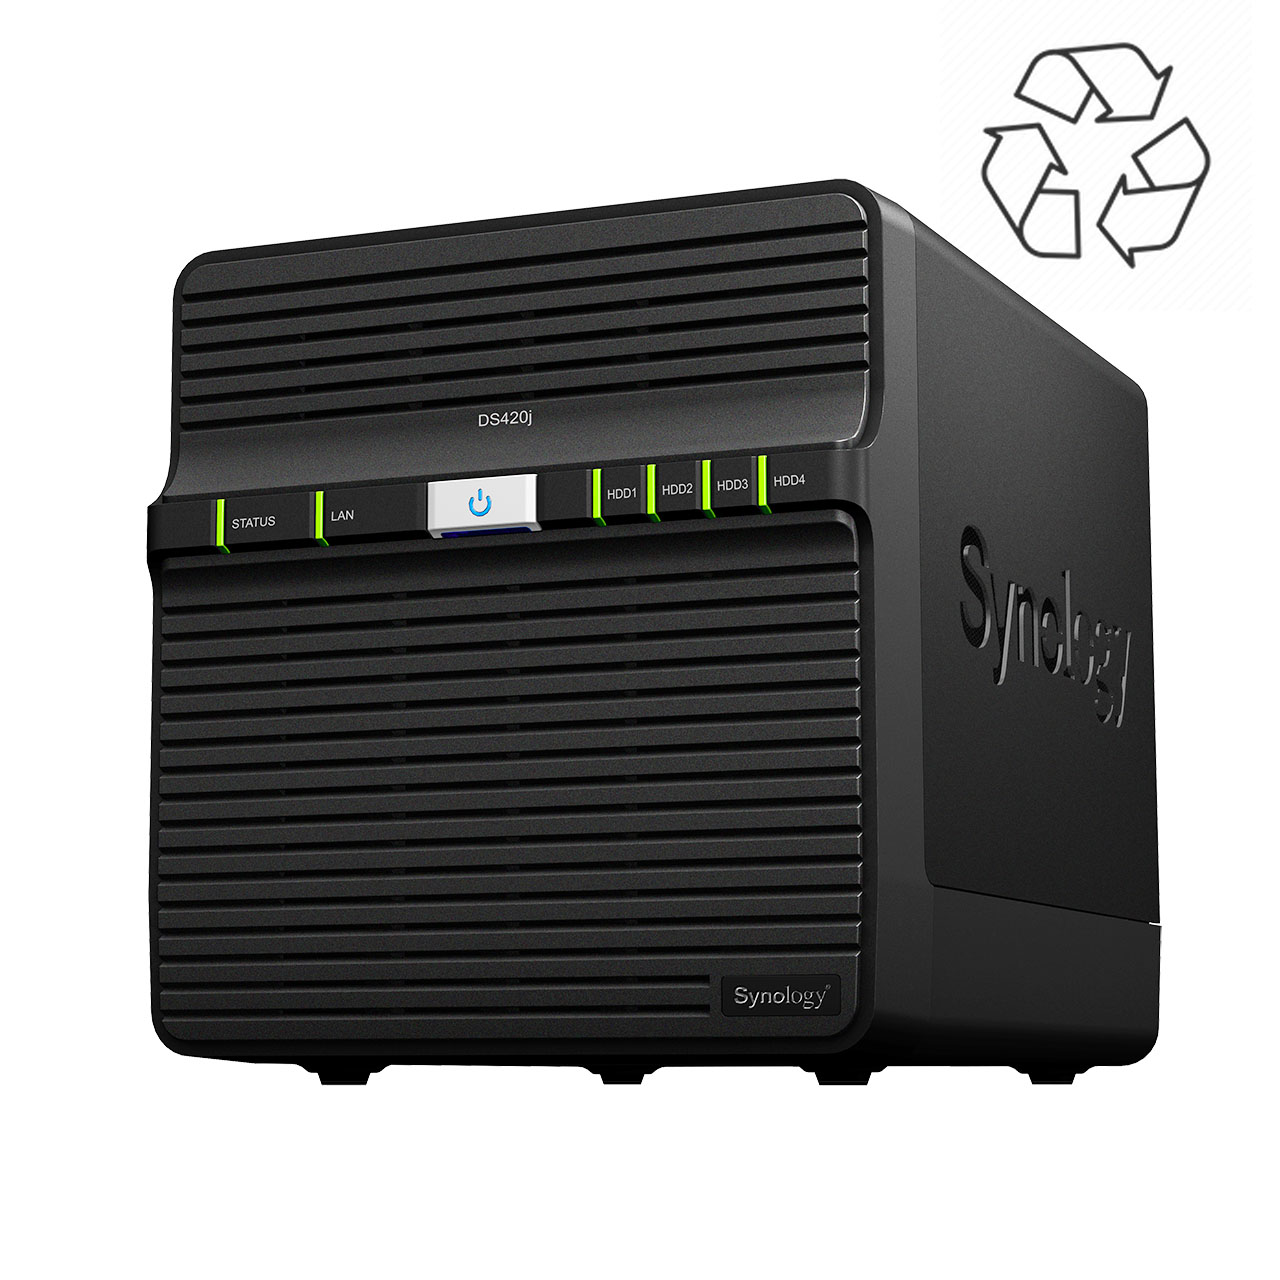 Synology DS420j 4-bay NAS